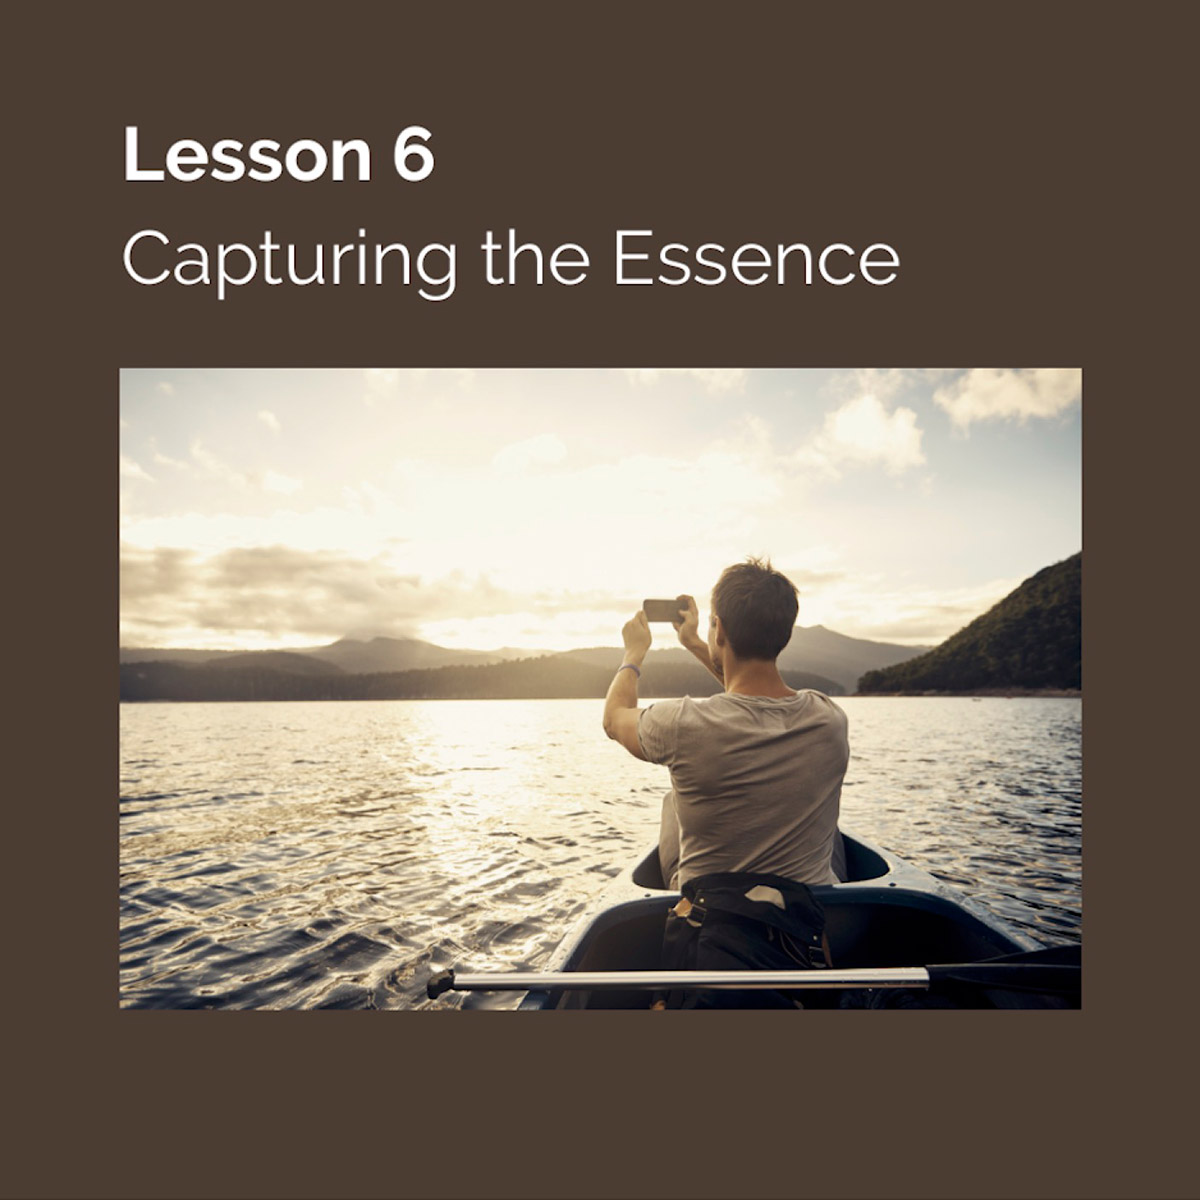 Lesson 6: Capturing the Essence